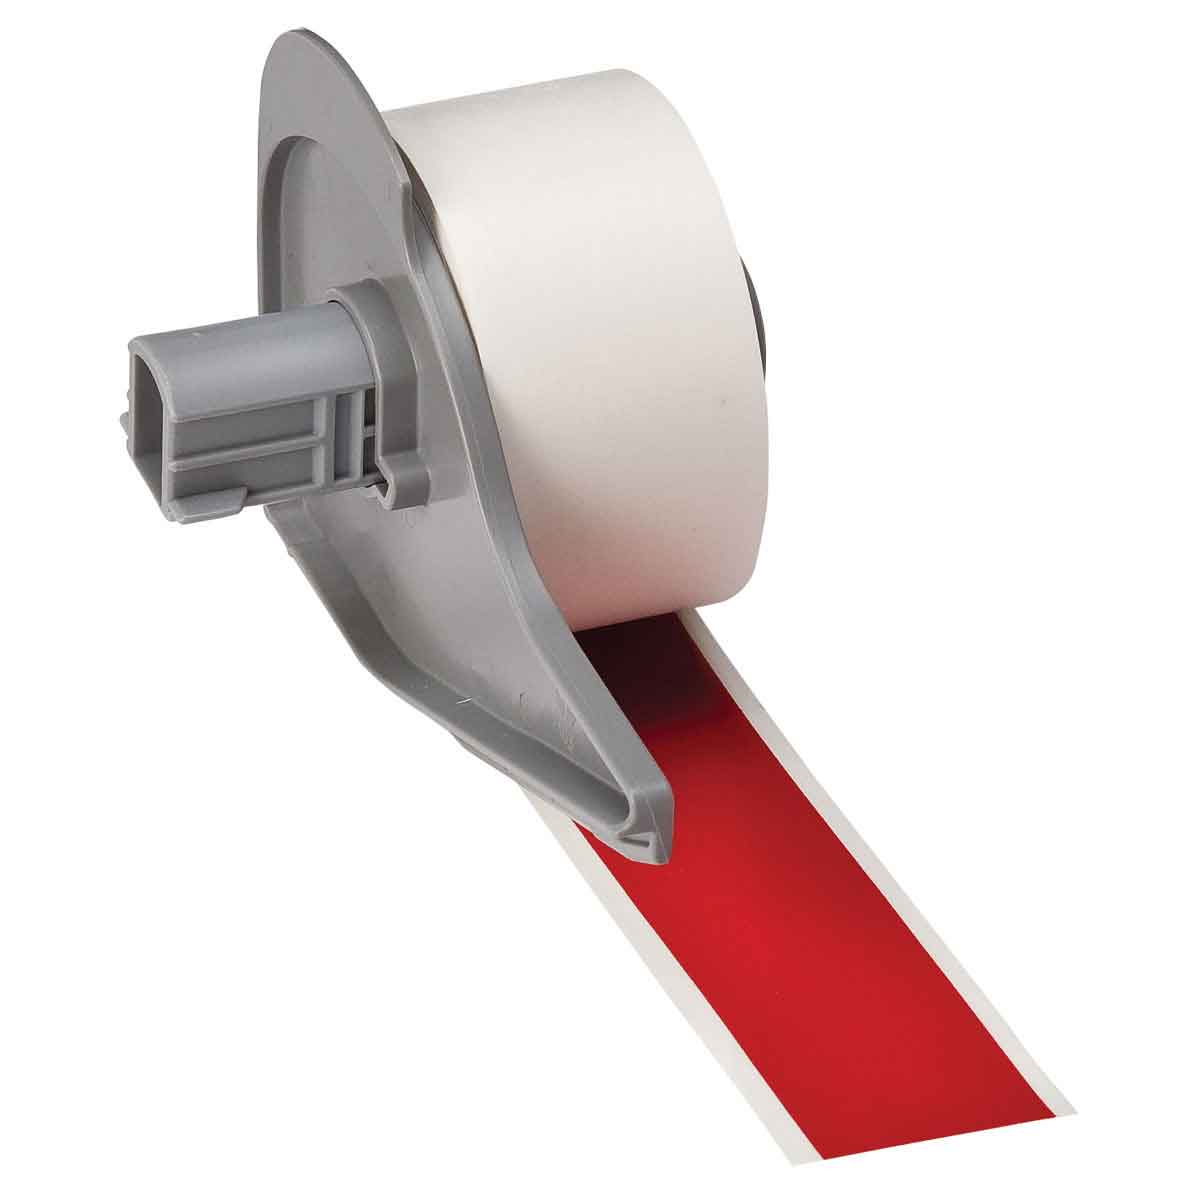 All Weather Permanent Adhesive Vinyl Label Tape for M6 M7 Printers